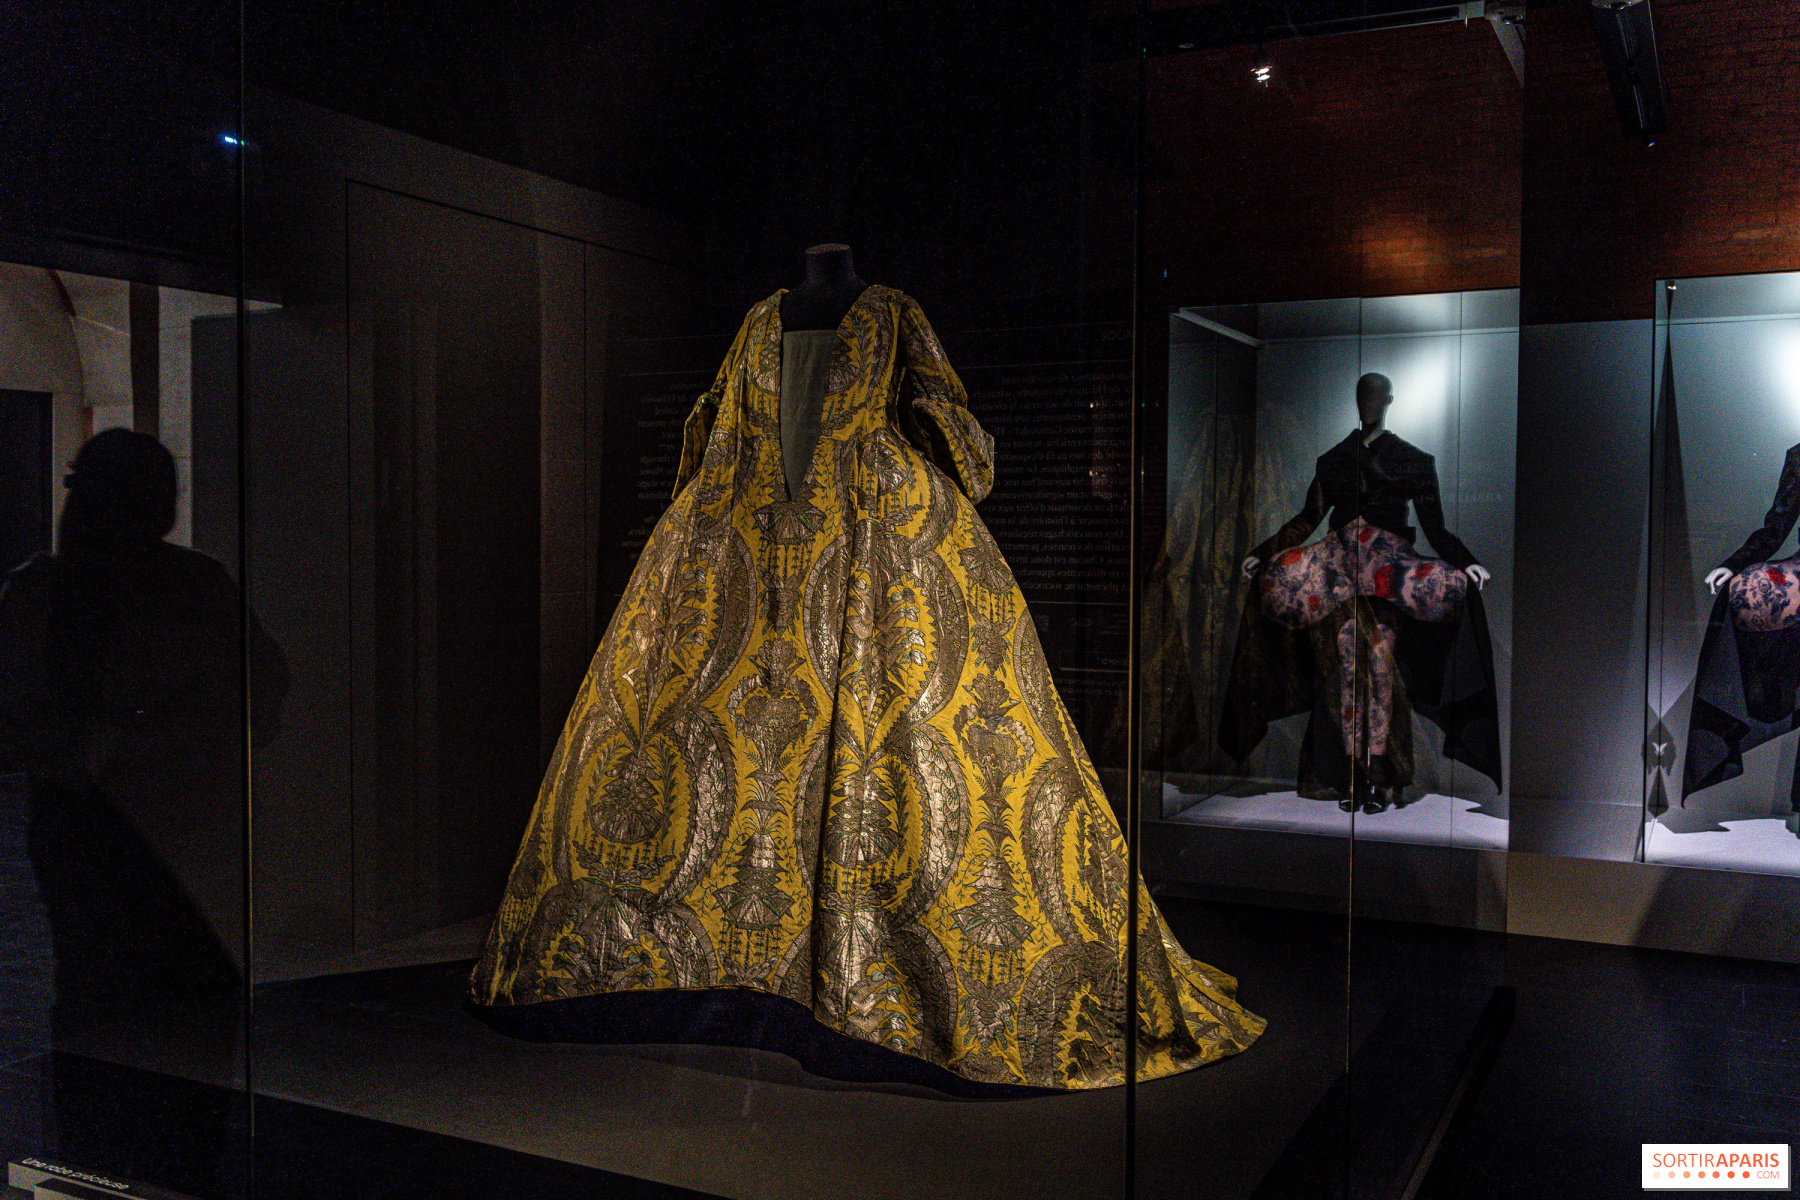 Louis Vuitton Makes Fashion History at the Musée d'Orsay